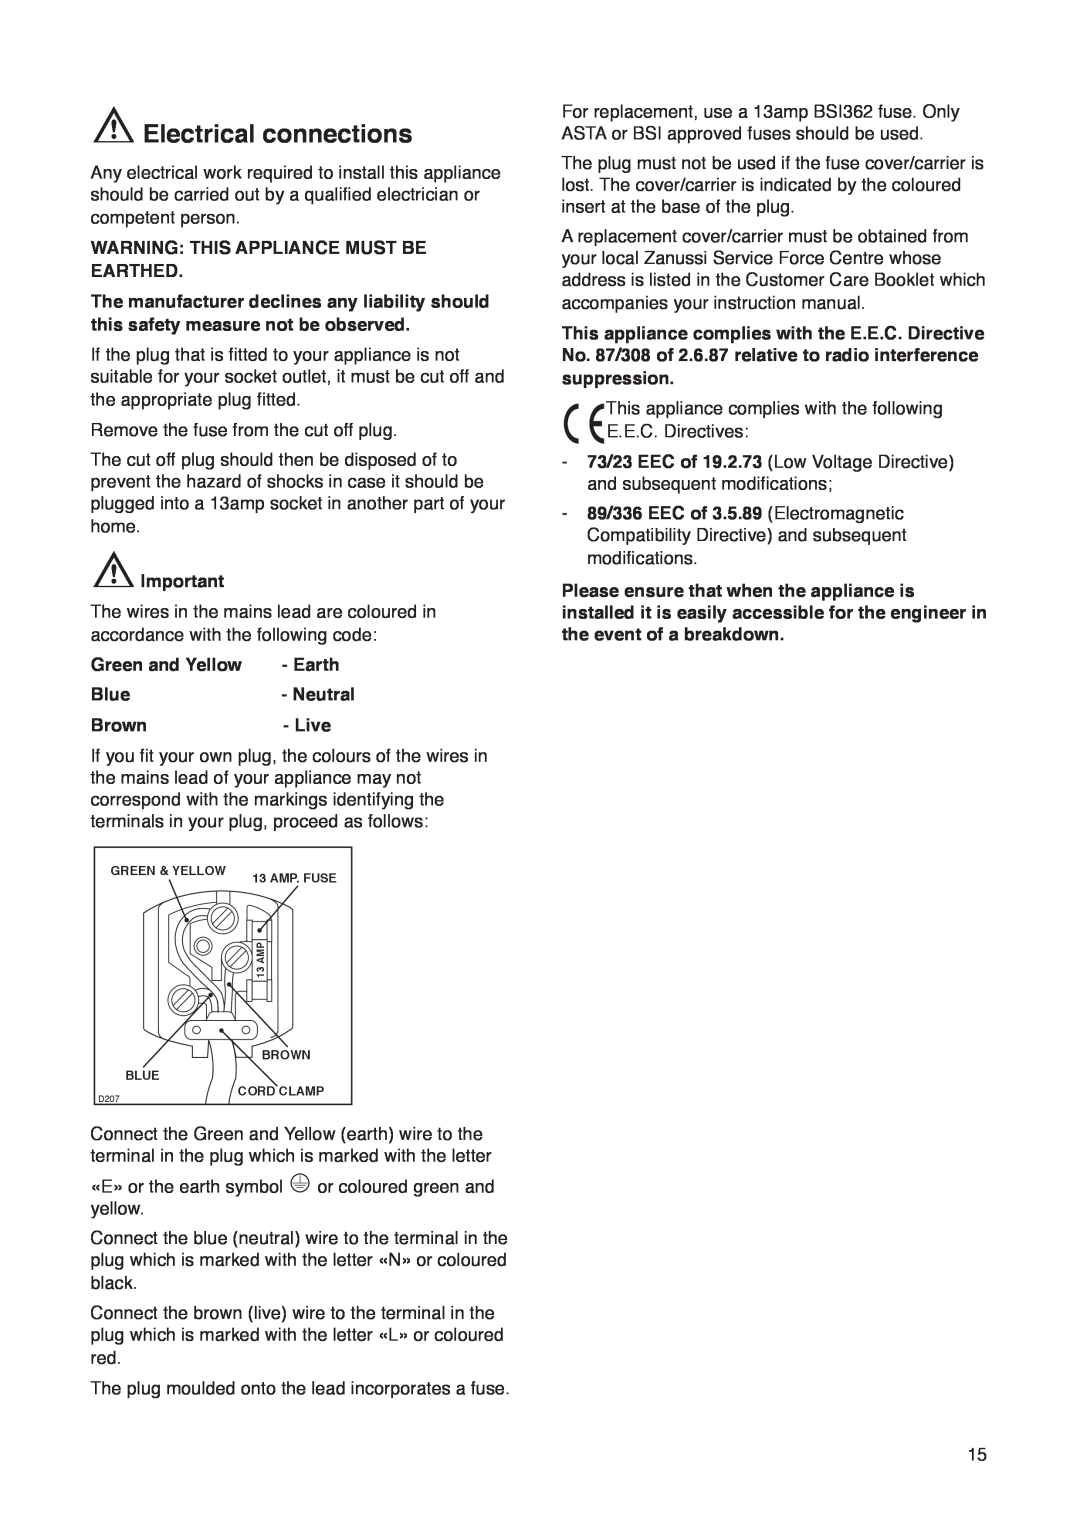 Zanussi ZK 53/37 R manual Electrical connections, Warning This Appliance Must Be Earthed, Green and Yellow 